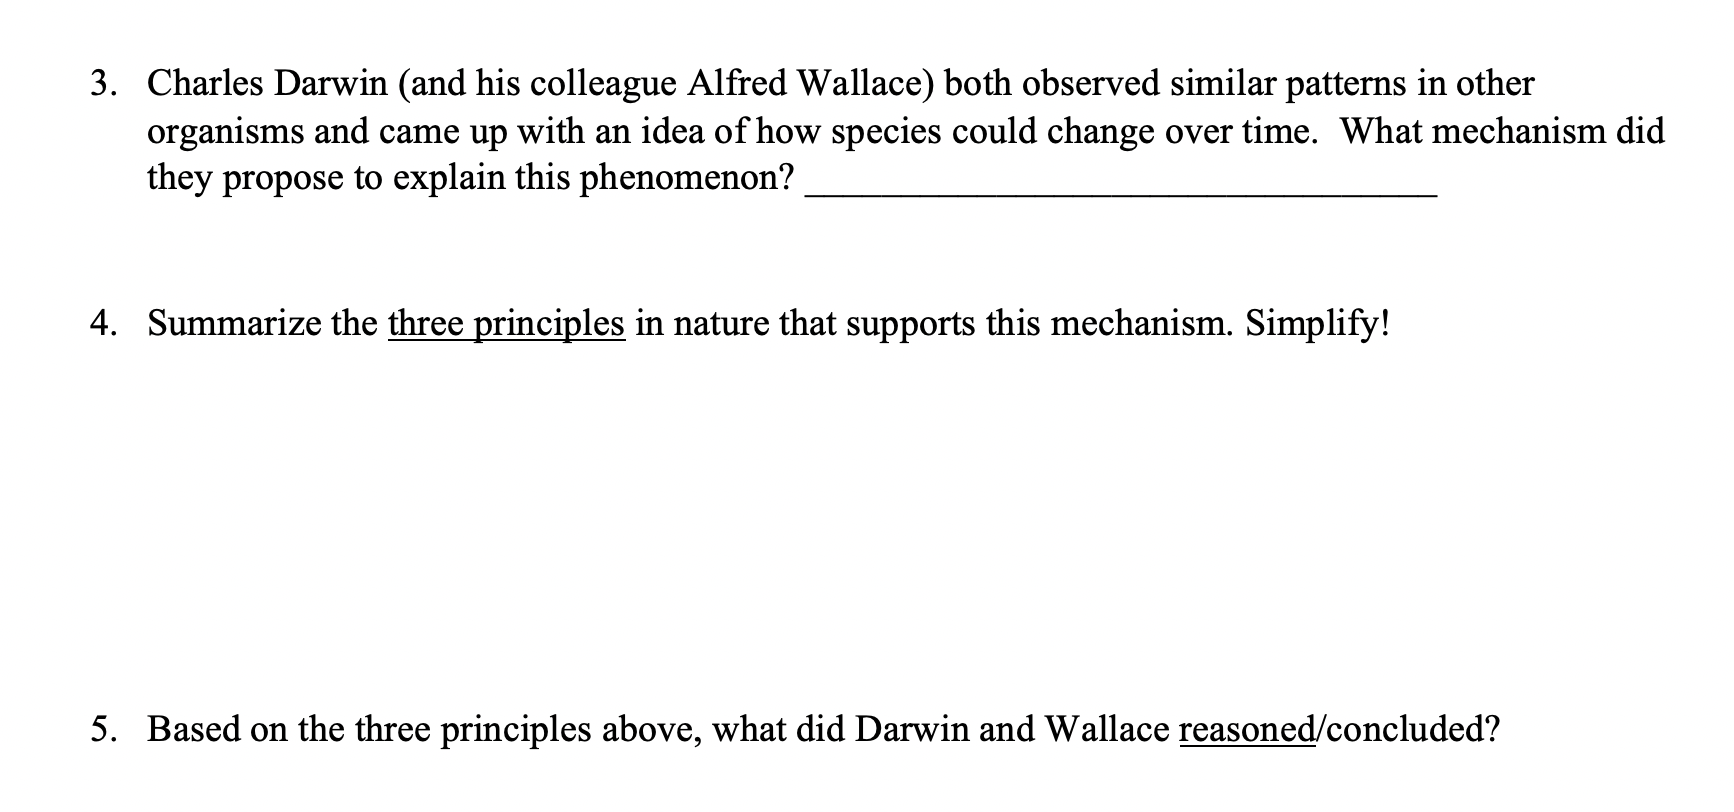 3. Charles Darwin (and his colleague Alfred Wallace) both observed similar patterns in other
organisms and came up with an idea of how species could change over time. What mechanism did
they propose to explain this phenomenon?
4. Summarize the three principles in nature that supports this mechanism. Simplify!
5. Based on the three principles above, what did Darwin and Wallace reasoned/concluded?
